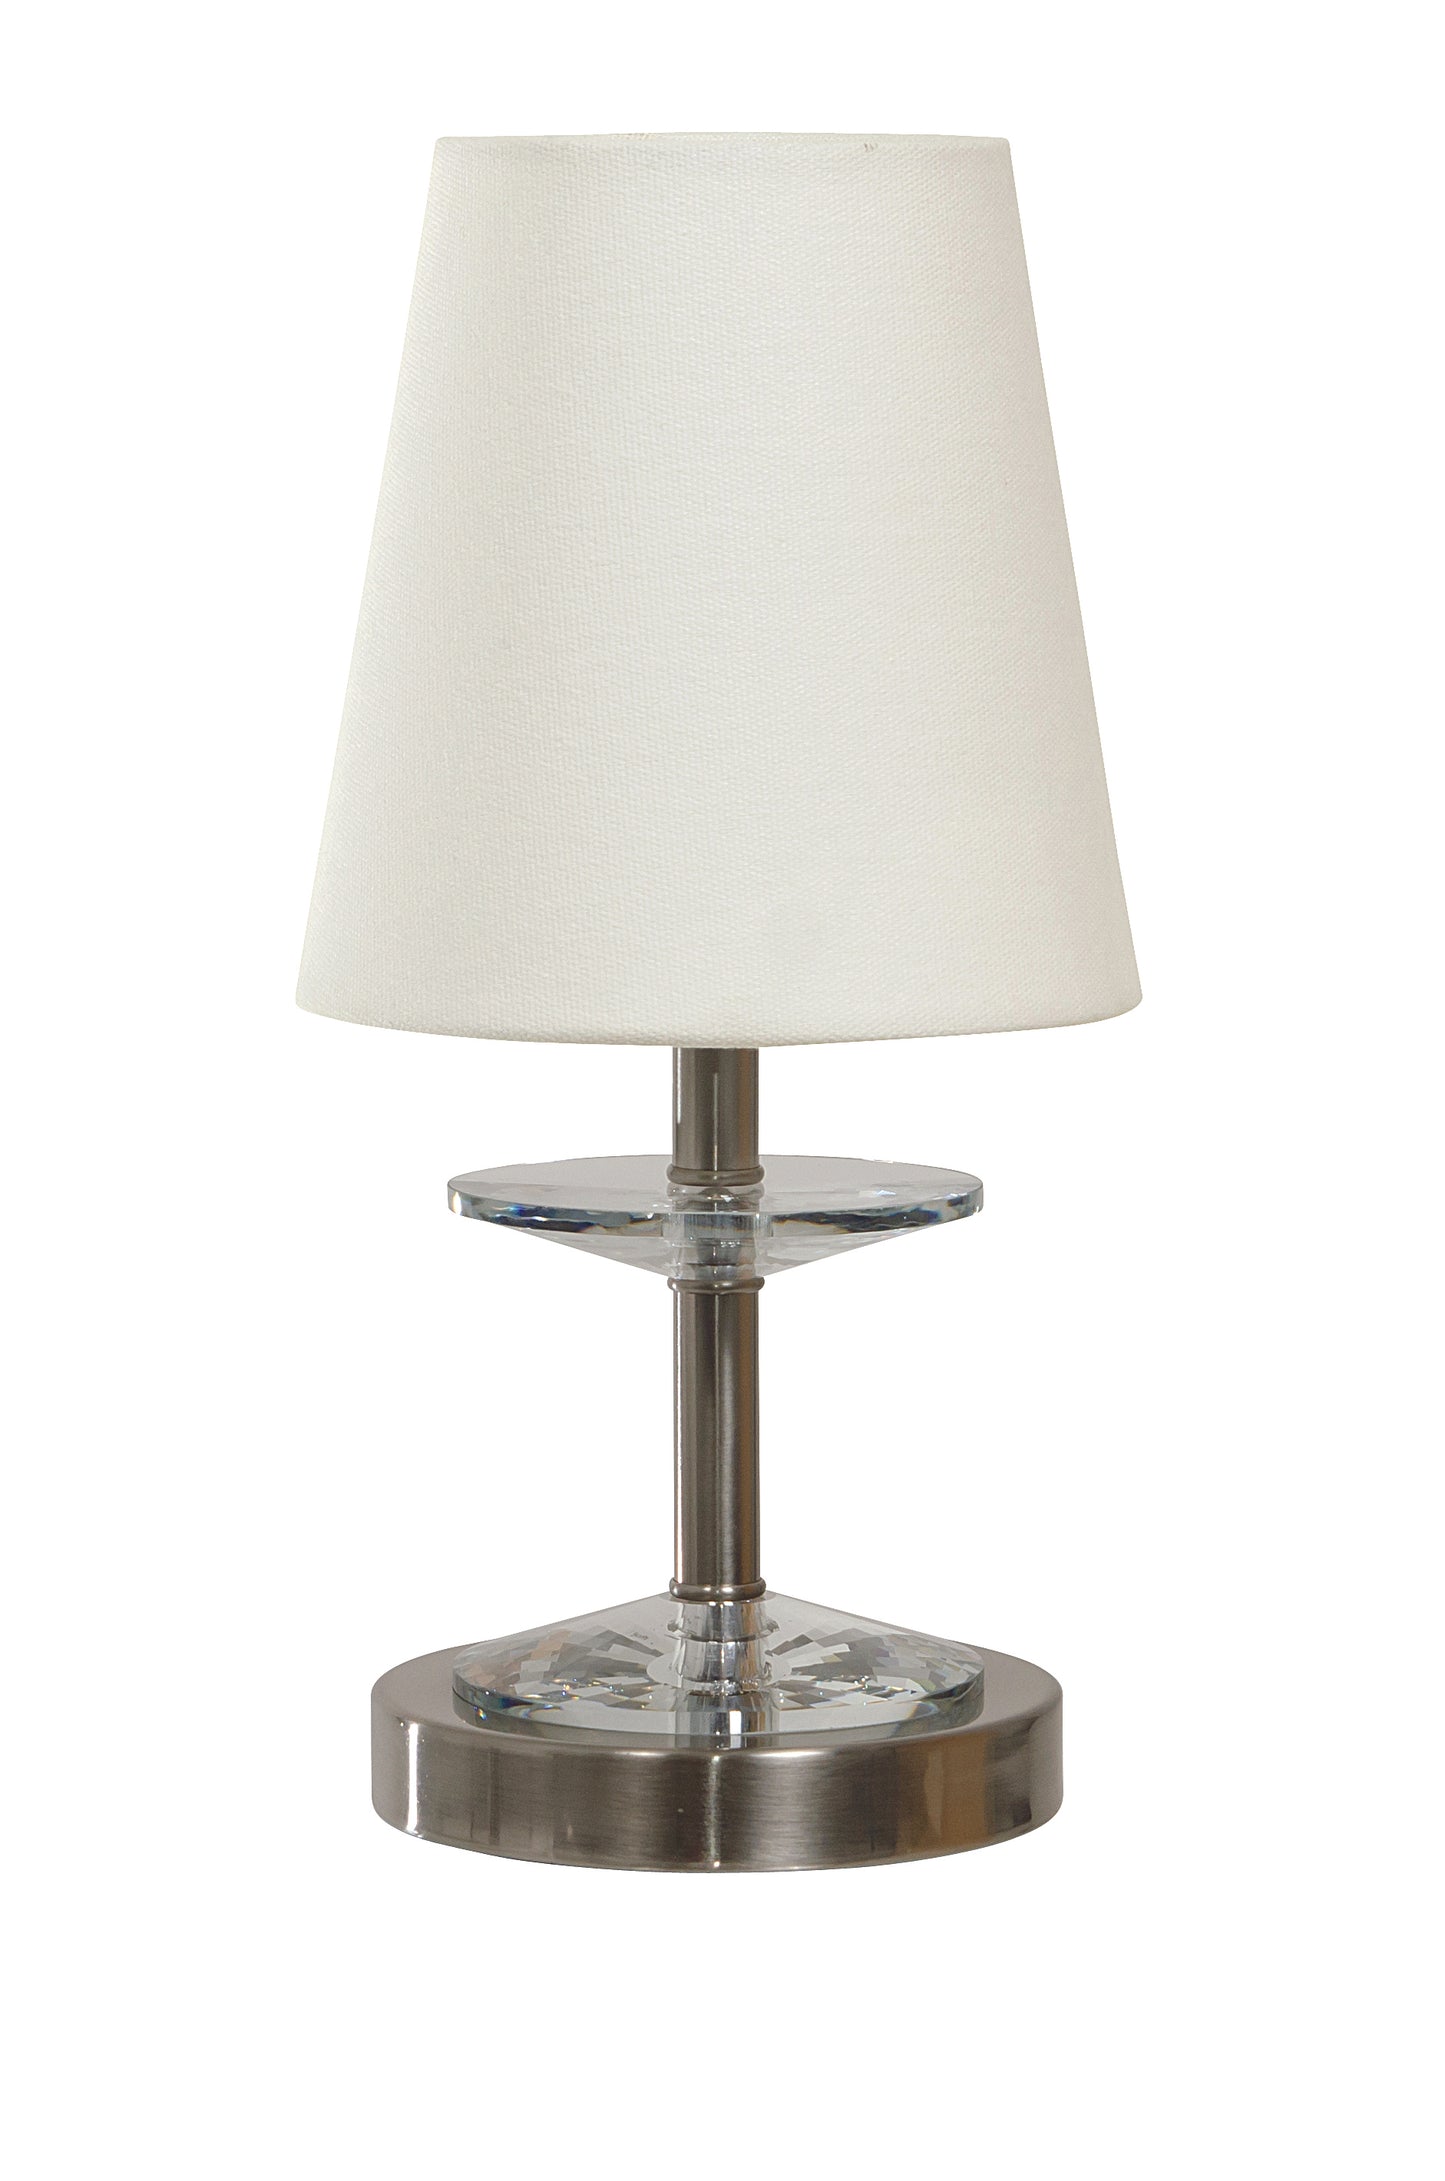 House of Troy Bryson Mini Crystal Disk Satin Nickel Accent Lamp B204-SN